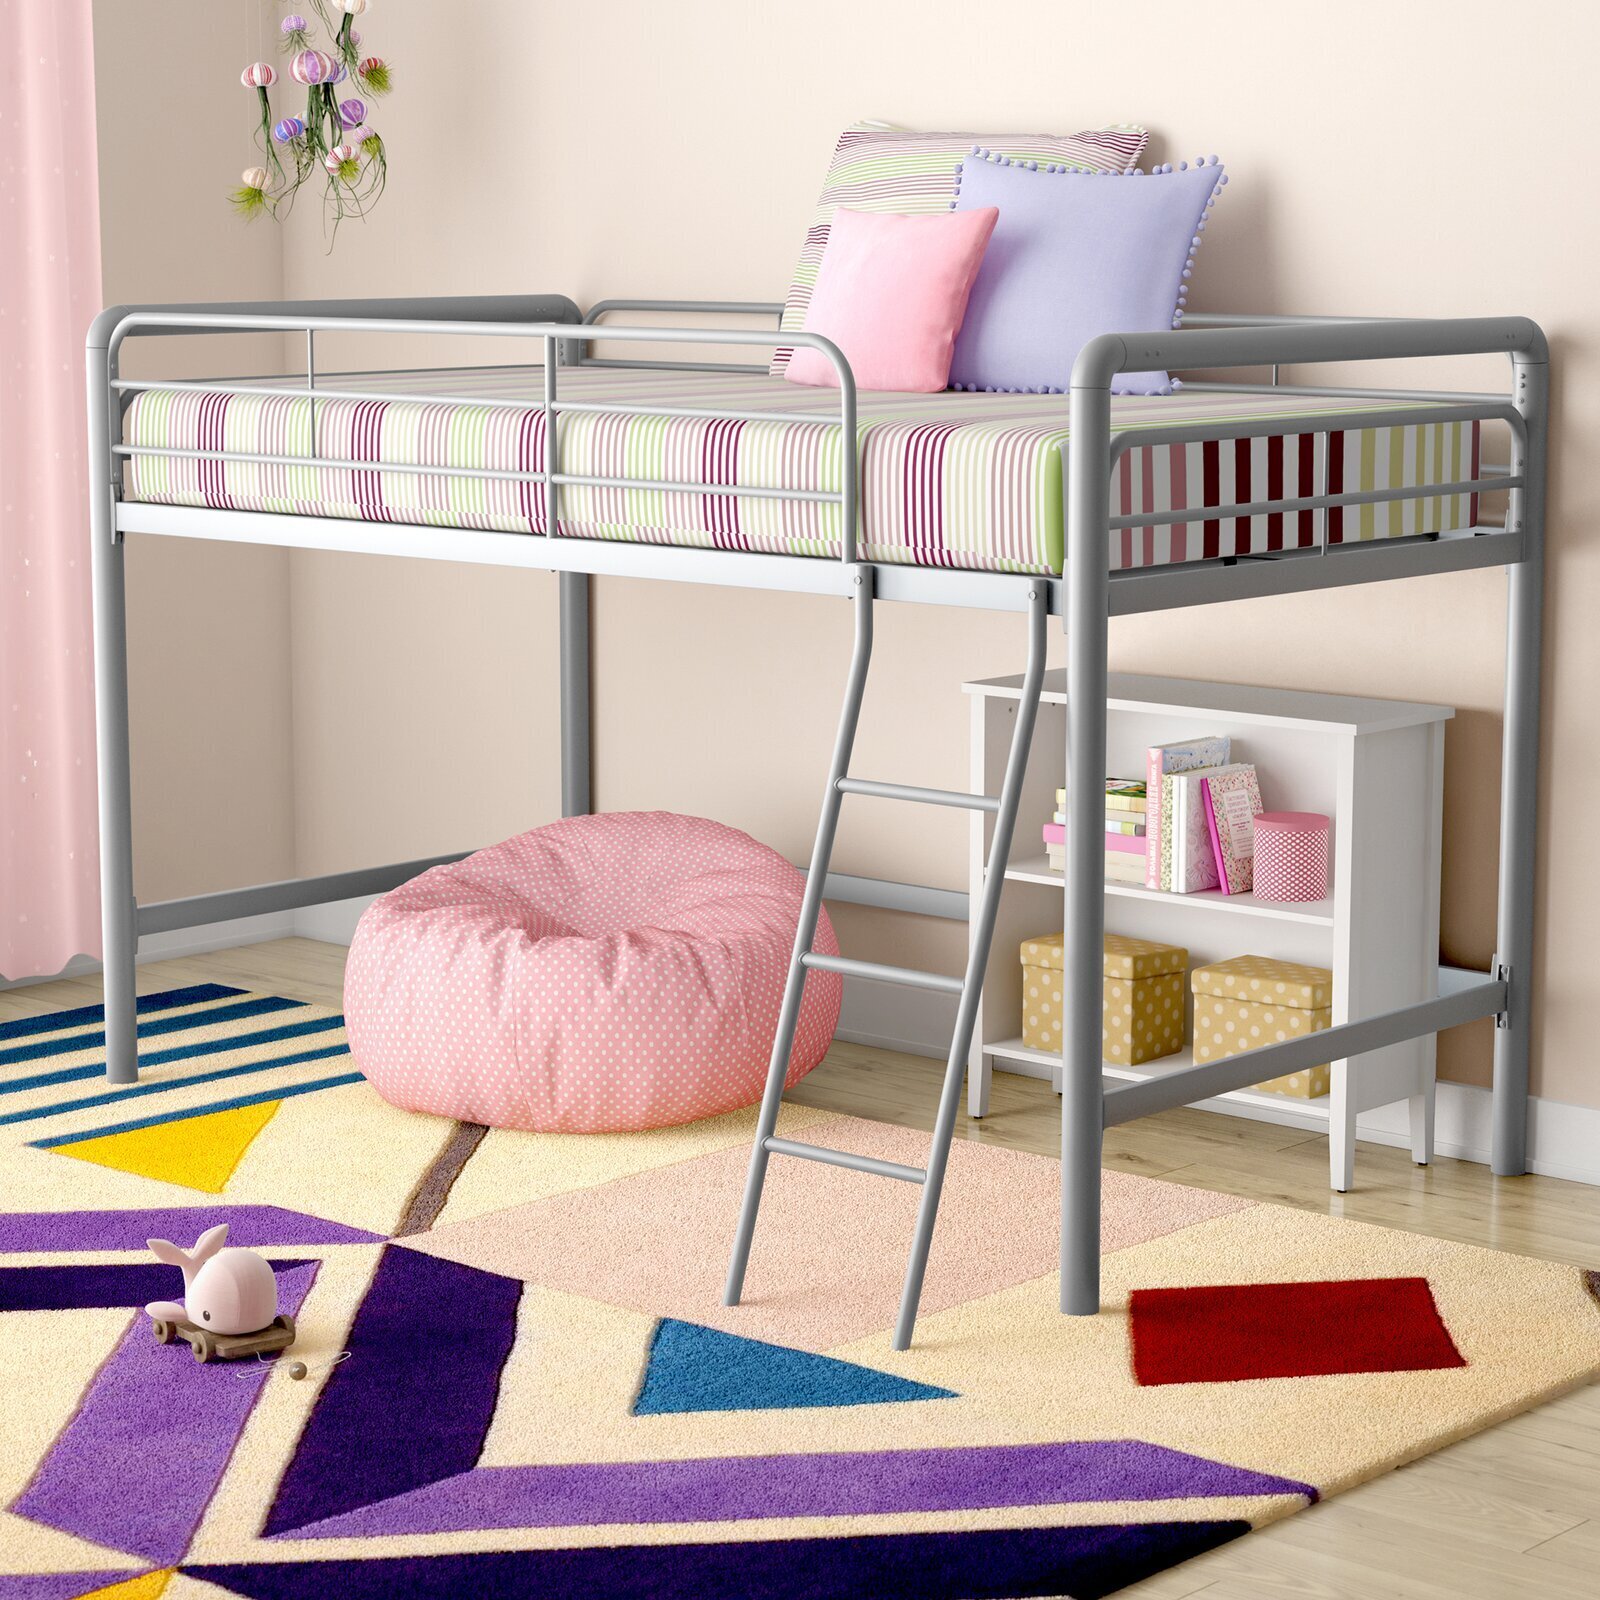 Loft Twin Bed With Play Area Underneath